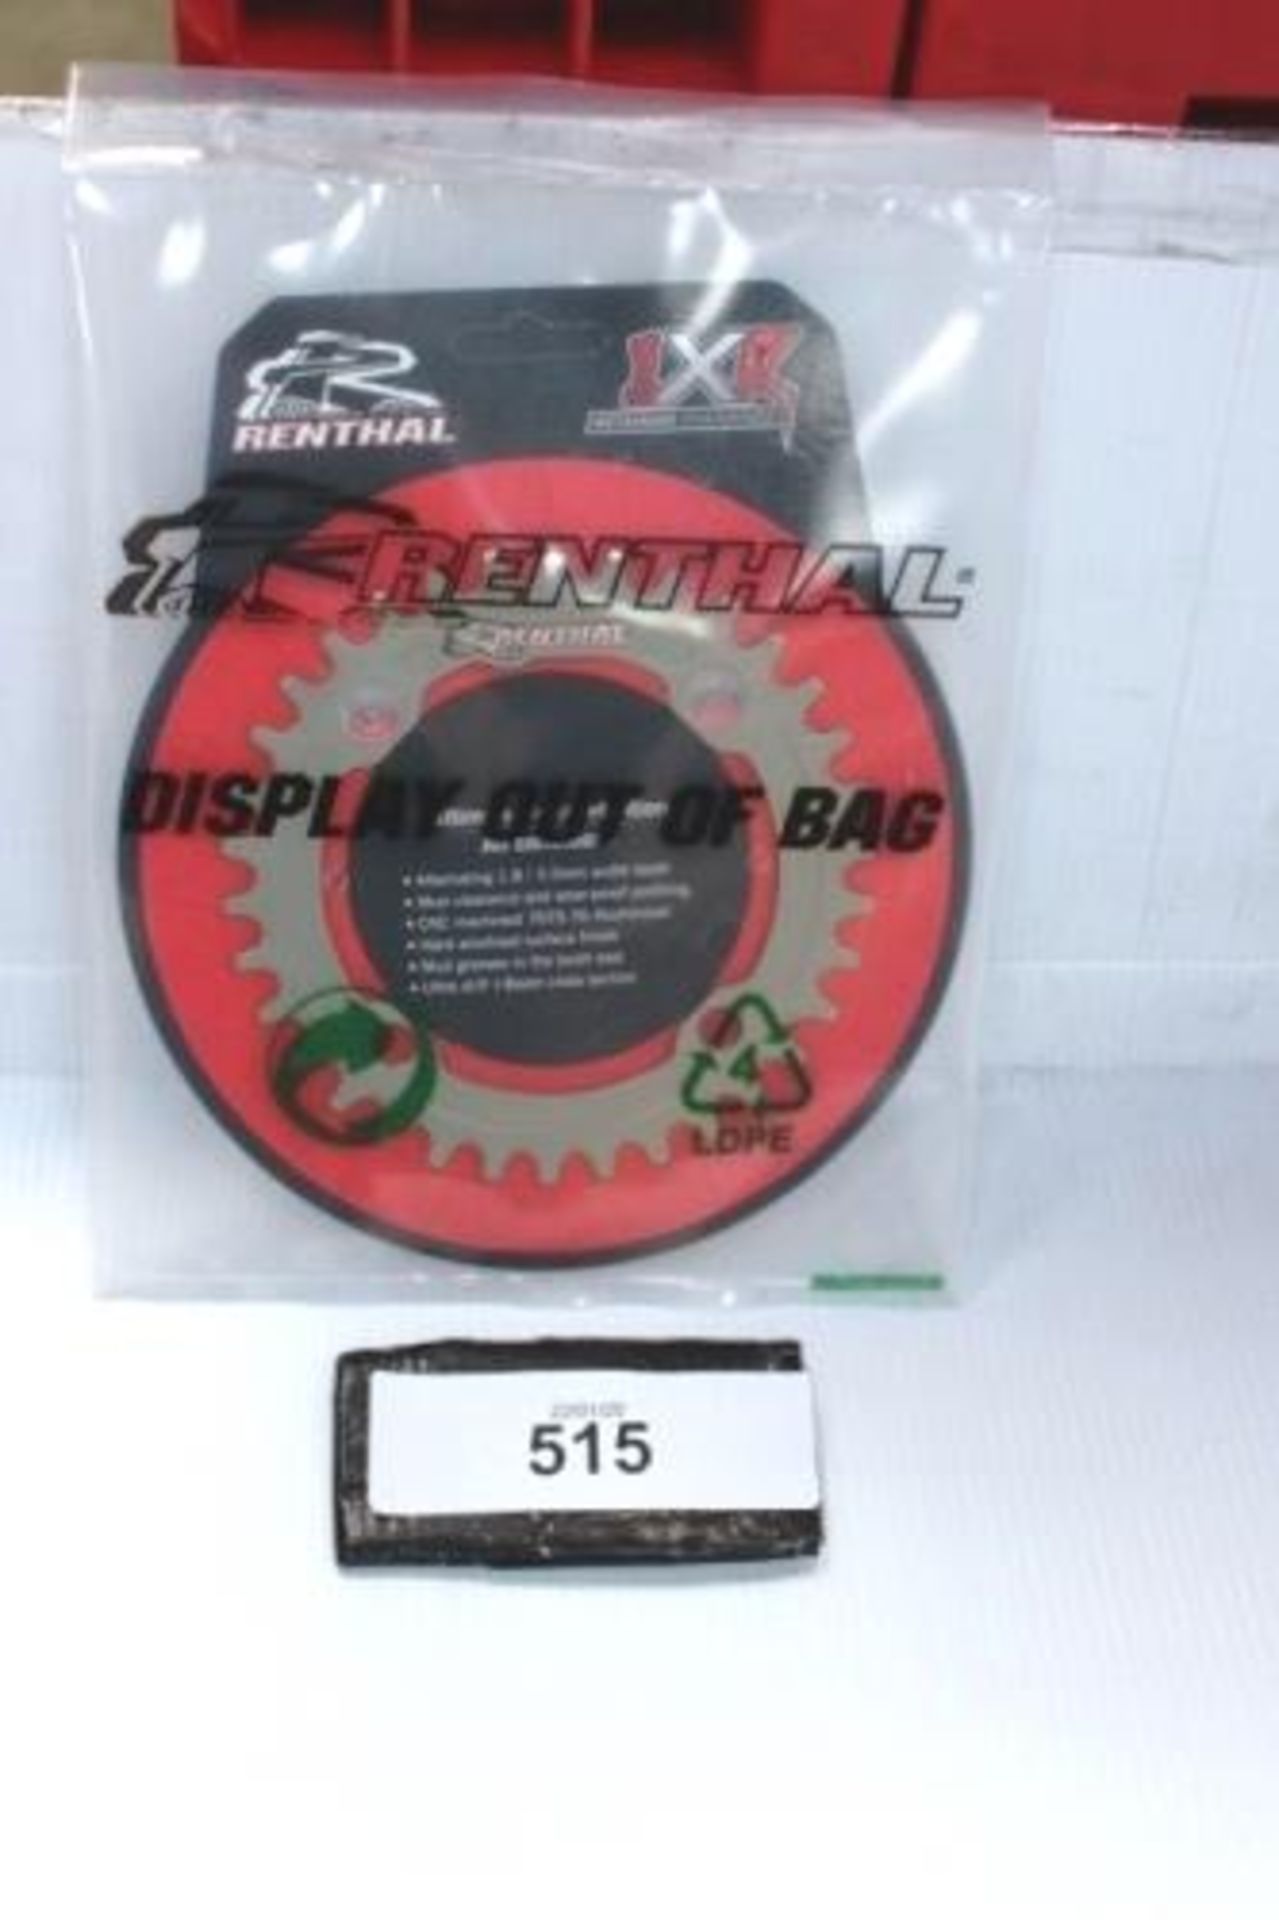 3 x Renthal 4 arm cycle chain rings, MCR107-564-34PHA - New in pack (office)